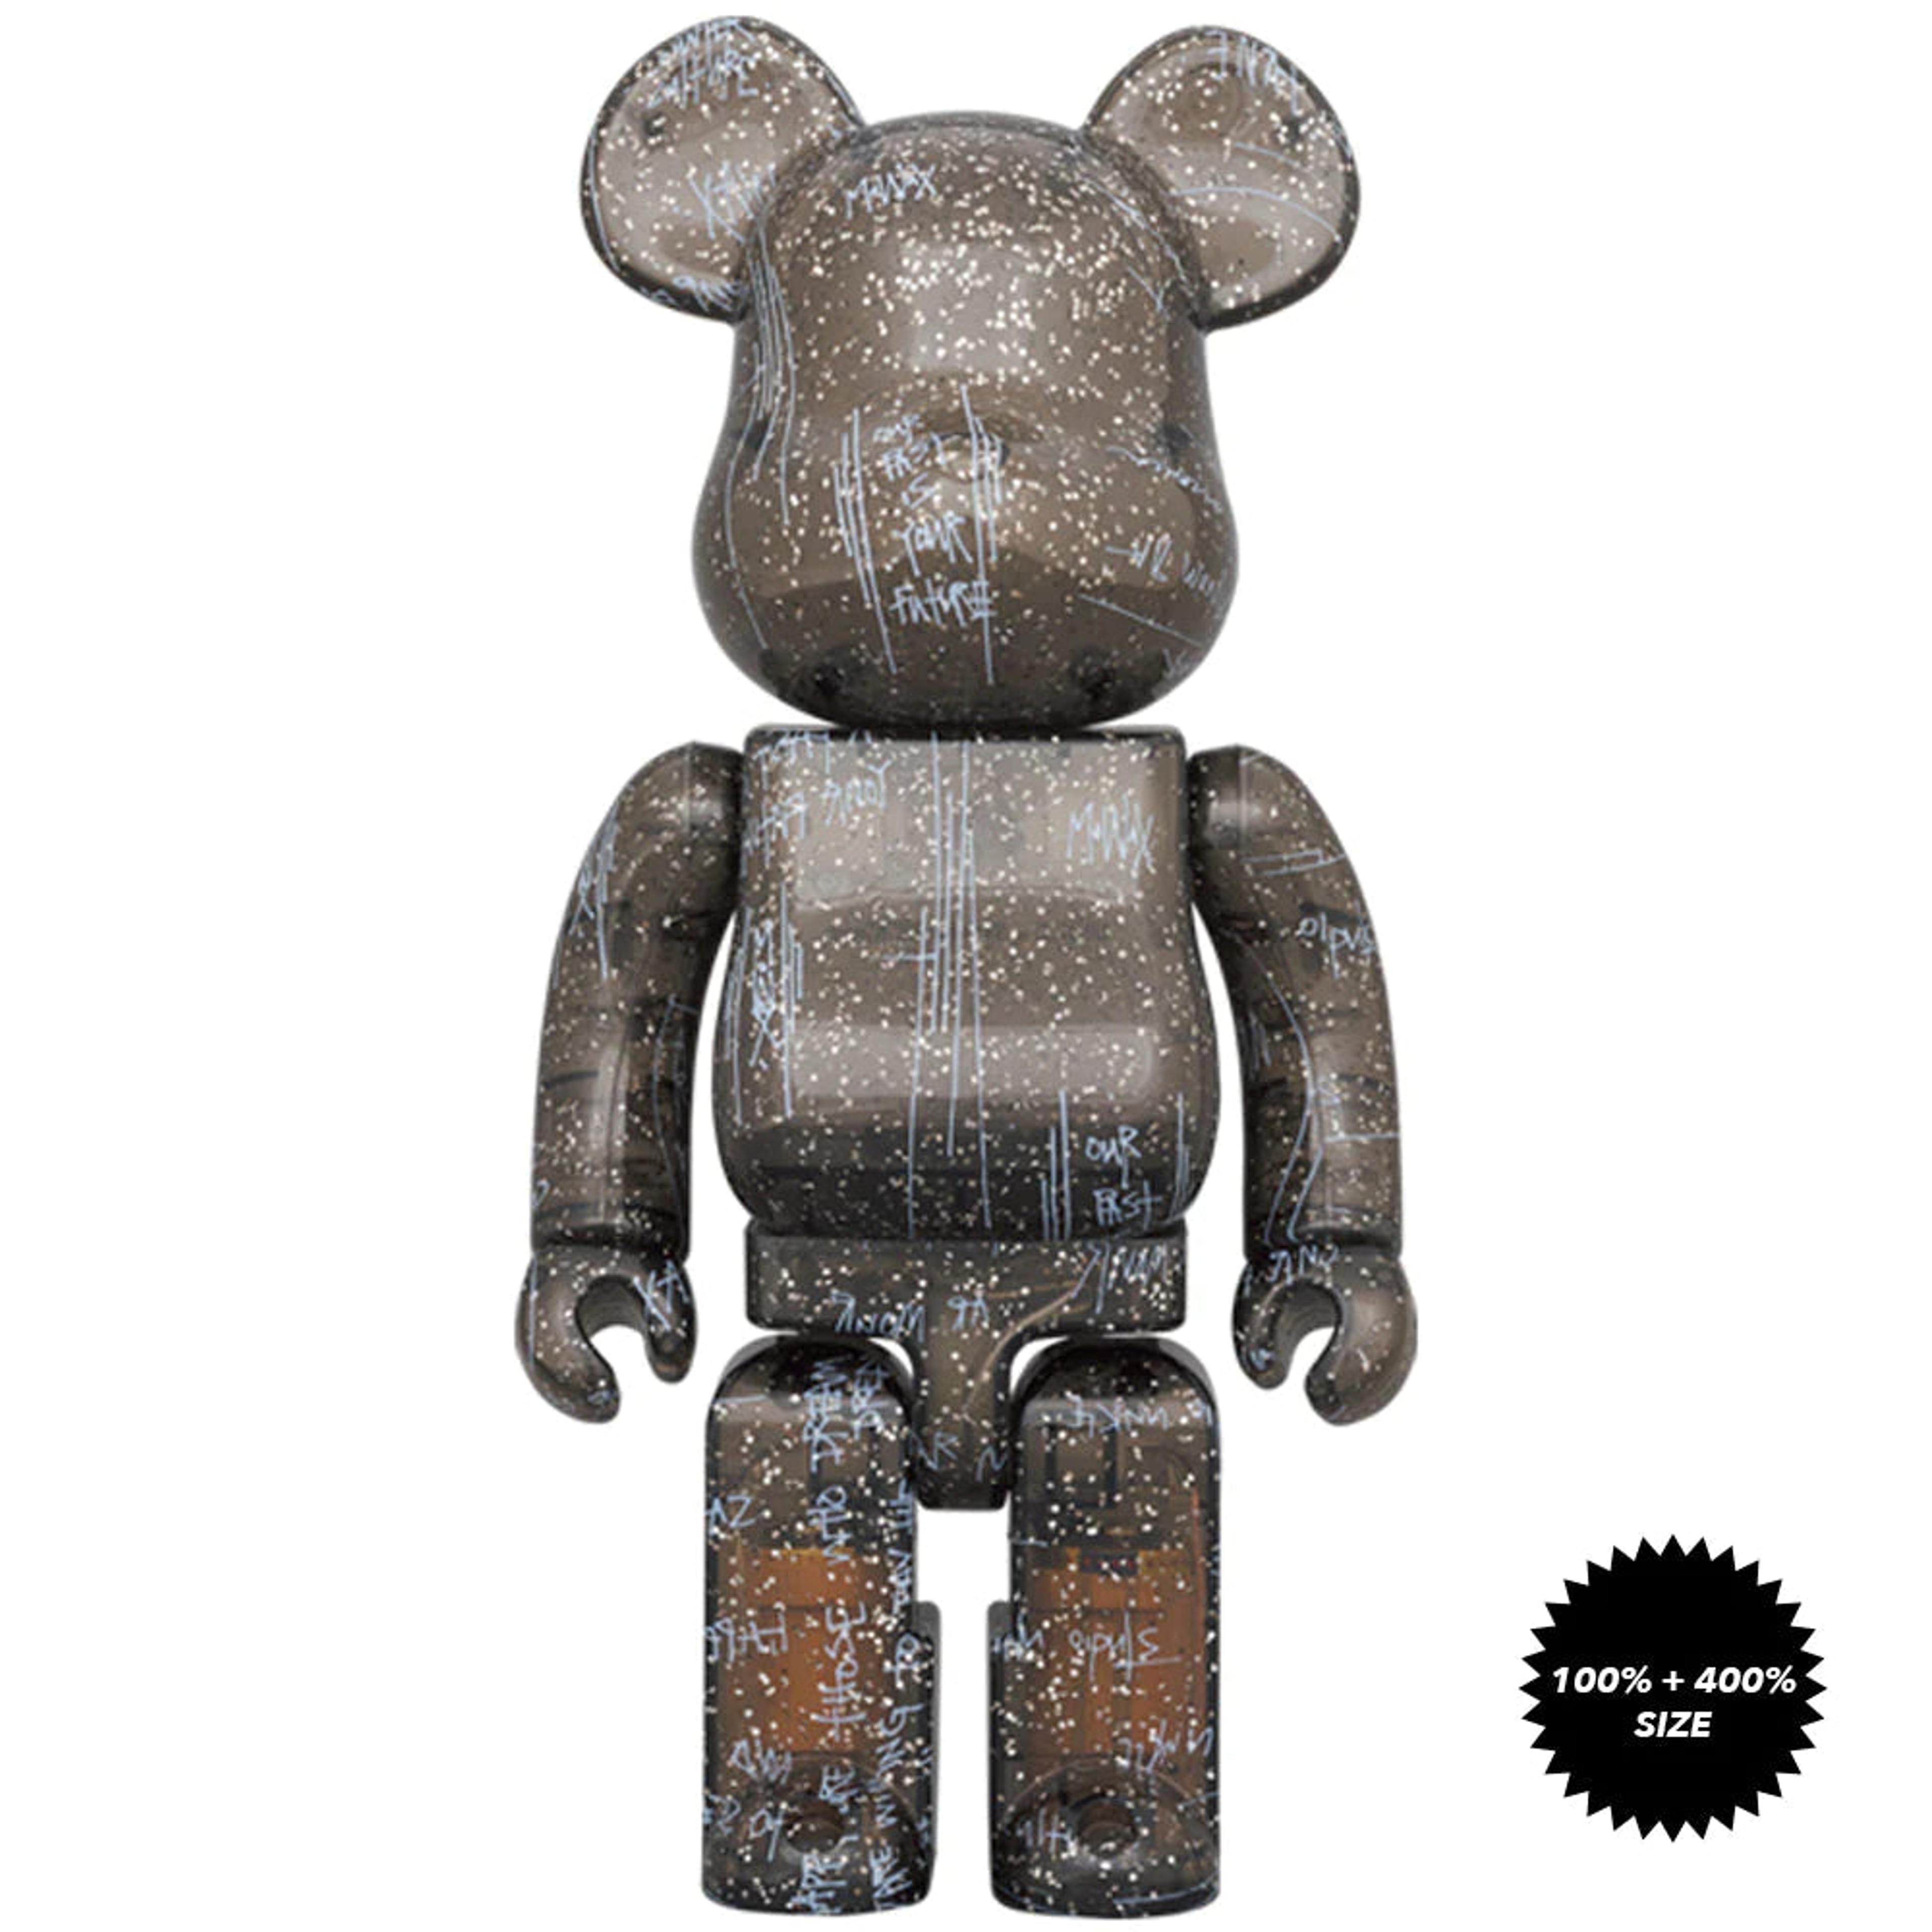 Alternate View 2 of BE@RBRICK UNKLE X STUDIO AR.MOUR 400％ + 100%